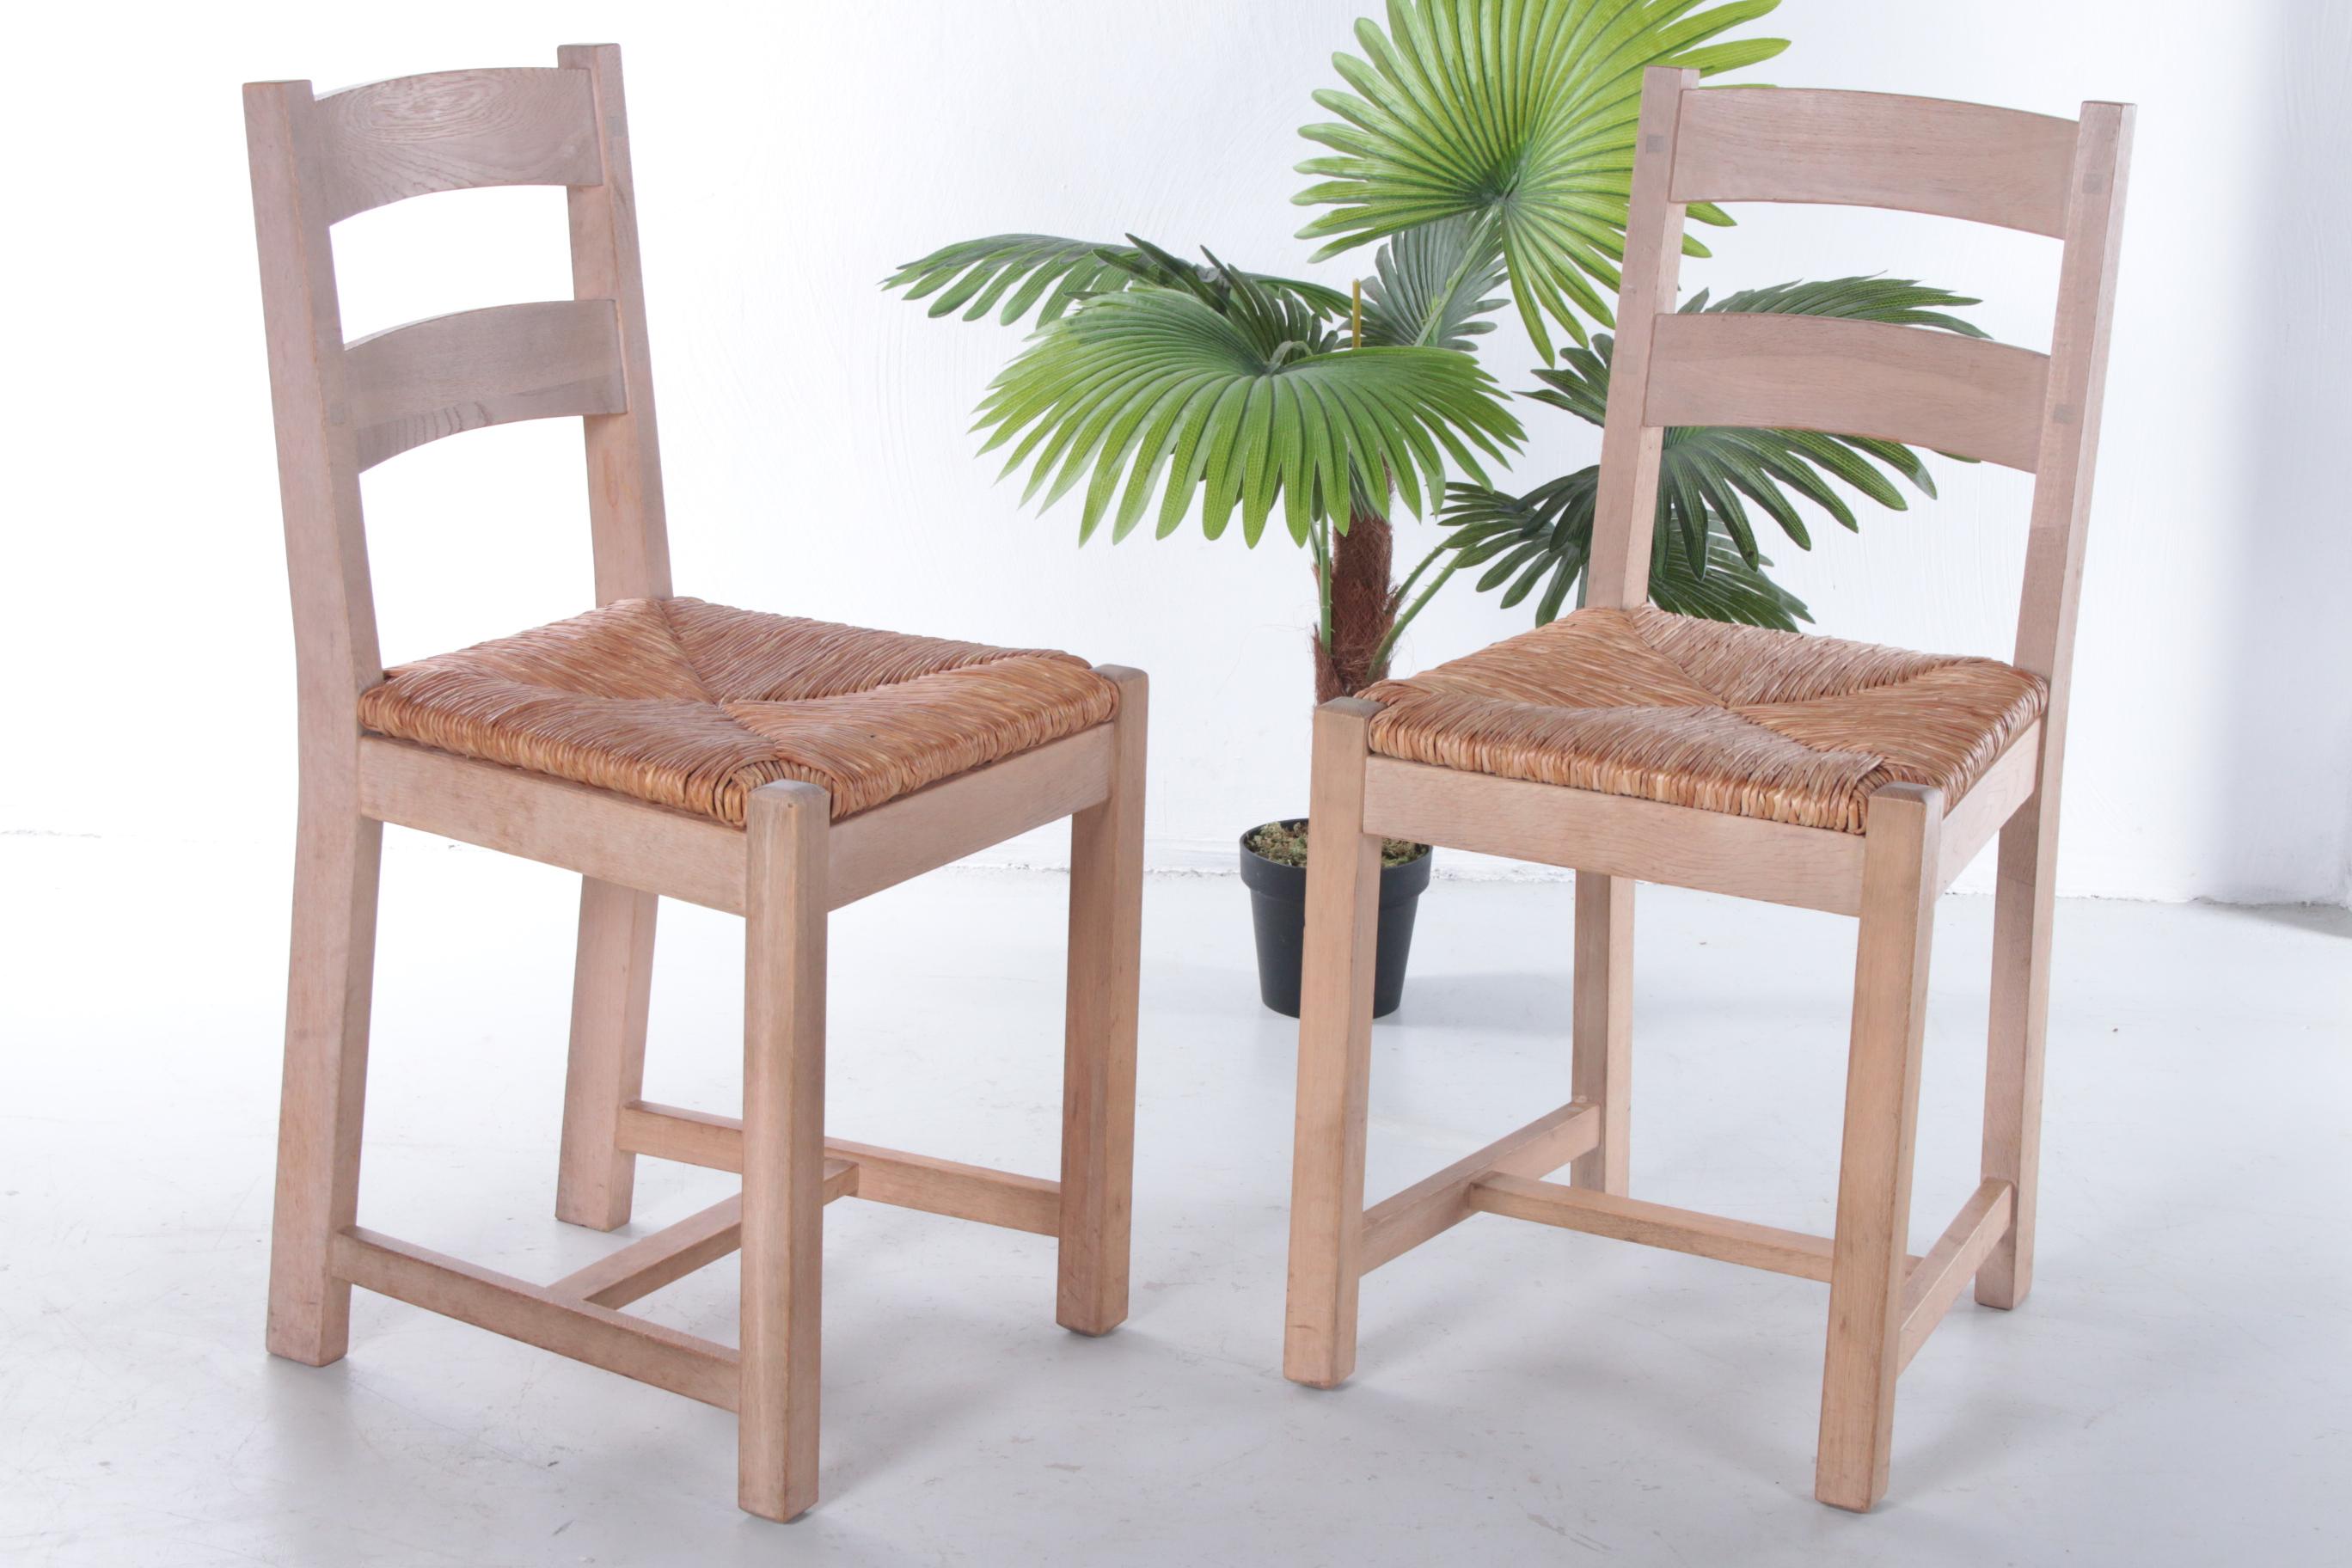 Beautiful set of 2 Danish oak kitchen chairs with wicker seat, produced in the 1970s. 

The chairs were bought in Denmark and also radiate a typical simplistic Scandinavian design, but the designer is unknown to us.

The chairs are very sturdy